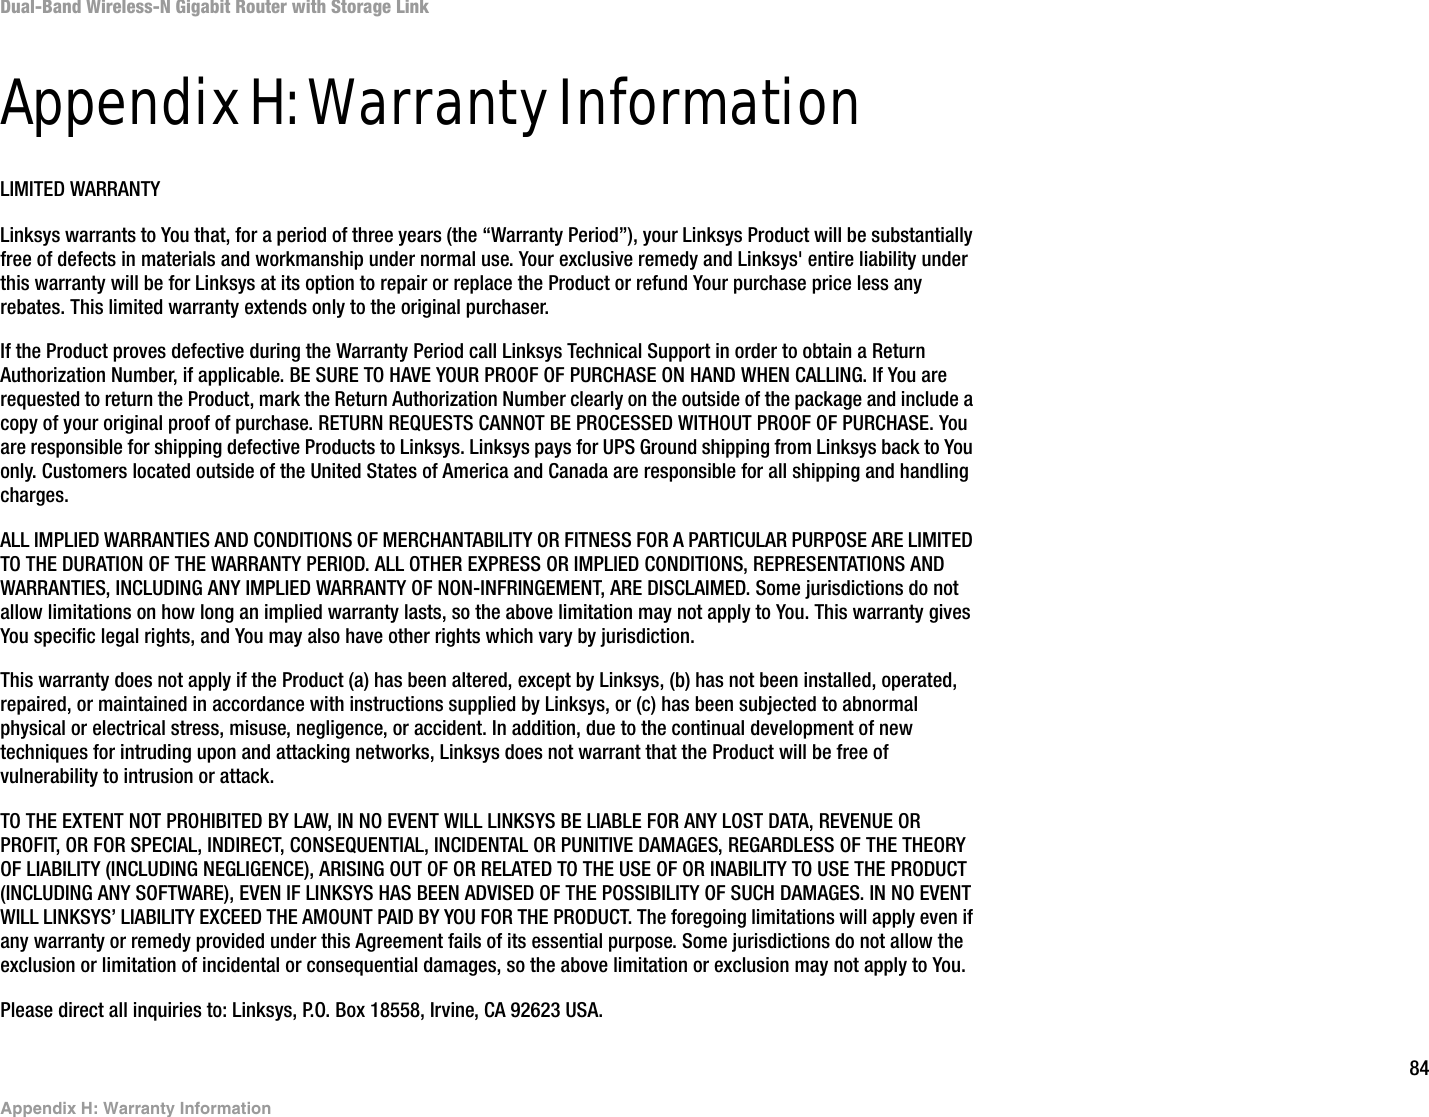 84Appendix H: Warranty InformationDual-Band Wireless-N Gigabit Router with Storage LinkAppendix H: Warranty InformationLIMITED WARRANTYLinksys warrants to You that, for a period of three years (the “Warranty Period”), your Linksys Product will be substantially free of defects in materials and workmanship under normal use. Your exclusive remedy and Linksys&apos; entire liability under this warranty will be for Linksys at its option to repair or replace the Product or refund Your purchase price less any rebates. This limited warranty extends only to the original purchaser. If the Product proves defective during the Warranty Period call Linksys Technical Support in order to obtain a Return Authorization Number, if applicable. BE SURE TO HAVE YOUR PROOF OF PURCHASE ON HAND WHEN CALLING. If You are requested to return the Product, mark the Return Authorization Number clearly on the outside of the package and include a copy of your original proof of purchase. RETURN REQUESTS CANNOT BE PROCESSED WITHOUT PROOF OF PURCHASE. You are responsible for shipping defective Products to Linksys. Linksys pays for UPS Ground shipping from Linksys back to You only. Customers located outside of the United States of America and Canada are responsible for all shipping and handling charges. ALL IMPLIED WARRANTIES AND CONDITIONS OF MERCHANTABILITY OR FITNESS FOR A PARTICULAR PURPOSE ARE LIMITED TO THE DURATION OF THE WARRANTY PERIOD. ALL OTHER EXPRESS OR IMPLIED CONDITIONS, REPRESENTATIONS AND WARRANTIES, INCLUDING ANY IMPLIED WARRANTY OF NON-INFRINGEMENT, ARE DISCLAIMED. Some jurisdictions do not allow limitations on how long an implied warranty lasts, so the above limitation may not apply to You. This warranty gives You specific legal rights, and You may also have other rights which vary by jurisdiction.This warranty does not apply if the Product (a) has been altered, except by Linksys, (b) has not been installed, operated, repaired, or maintained in accordance with instructions supplied by Linksys, or (c) has been subjected to abnormal physical or electrical stress, misuse, negligence, or accident. In addition, due to the continual development of new techniques for intruding upon and attacking networks, Linksys does not warrant that the Product will be free of vulnerability to intrusion or attack.TO THE EXTENT NOT PROHIBITED BY LAW, IN NO EVENT WILL LINKSYS BE LIABLE FOR ANY LOST DATA, REVENUE OR PROFIT, OR FOR SPECIAL, INDIRECT, CONSEQUENTIAL, INCIDENTAL OR PUNITIVE DAMAGES, REGARDLESS OF THE THEORY OF LIABILITY (INCLUDING NEGLIGENCE), ARISING OUT OF OR RELATED TO THE USE OF OR INABILITY TO USE THE PRODUCT (INCLUDING ANY SOFTWARE), EVEN IF LINKSYS HAS BEEN ADVISED OF THE POSSIBILITY OF SUCH DAMAGES. IN NO EVENT WILL LINKSYS’ LIABILITY EXCEED THE AMOUNT PAID BY YOU FOR THE PRODUCT. The foregoing limitations will apply even if any warranty or remedy provided under this Agreement fails of its essential purpose. Some jurisdictions do not allow the exclusion or limitation of incidental or consequential damages, so the above limitation or exclusion may not apply to You.Please direct all inquiries to: Linksys, P.O. Box 18558, Irvine, CA 92623 USA.